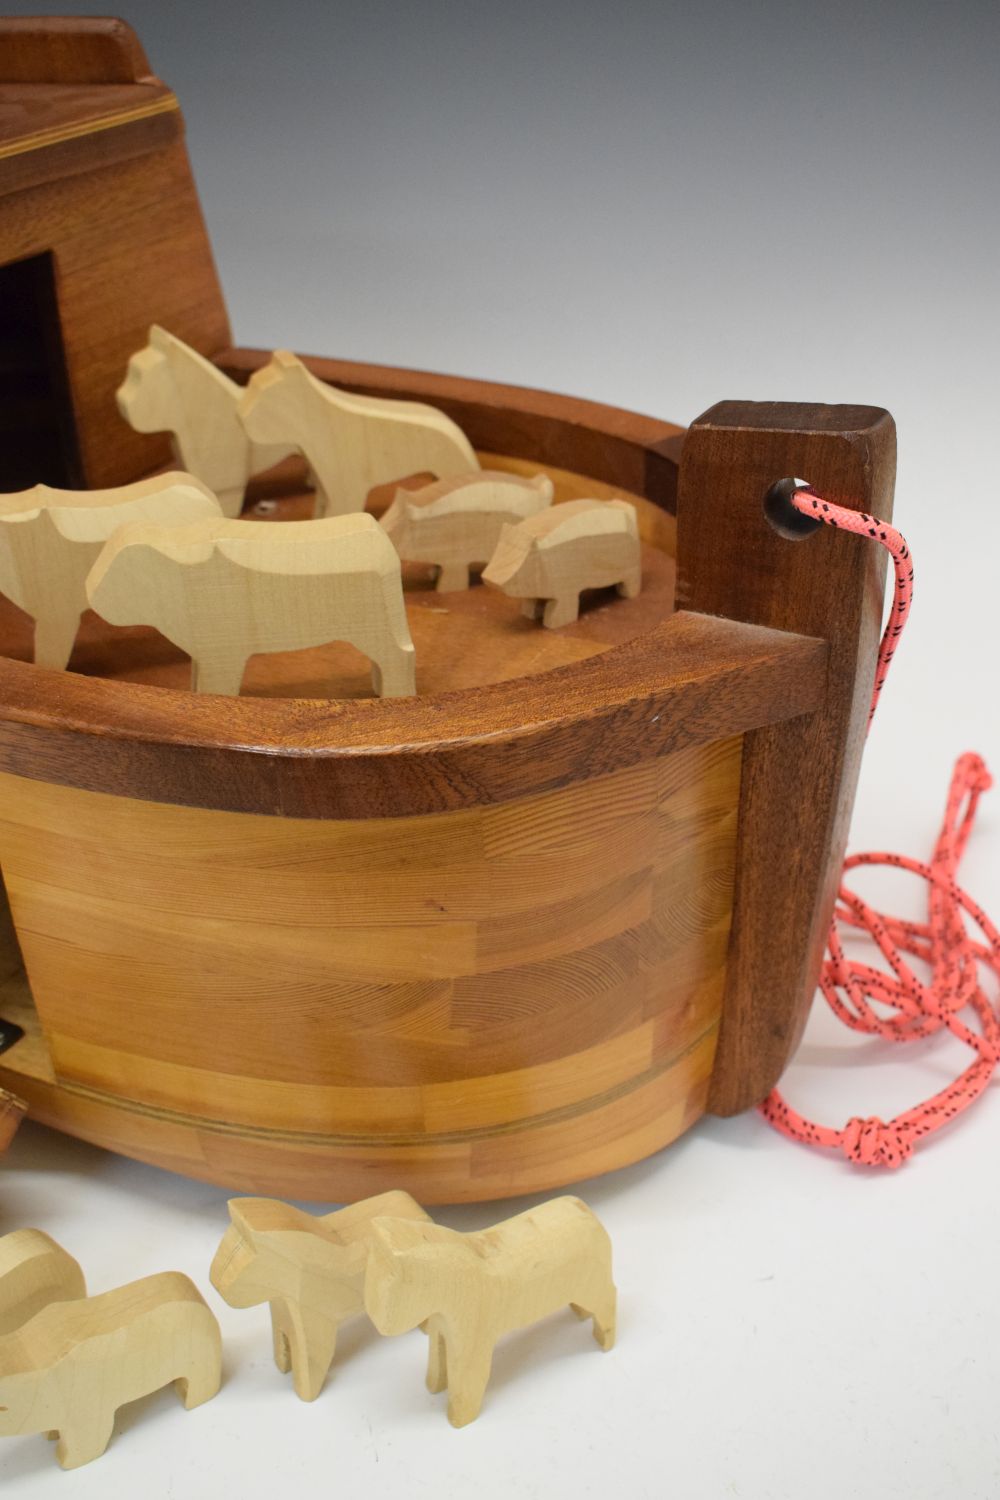 Scratch built pine and mahogany pull-along Noah's Ark with animals, 50cm long - Image 2 of 5